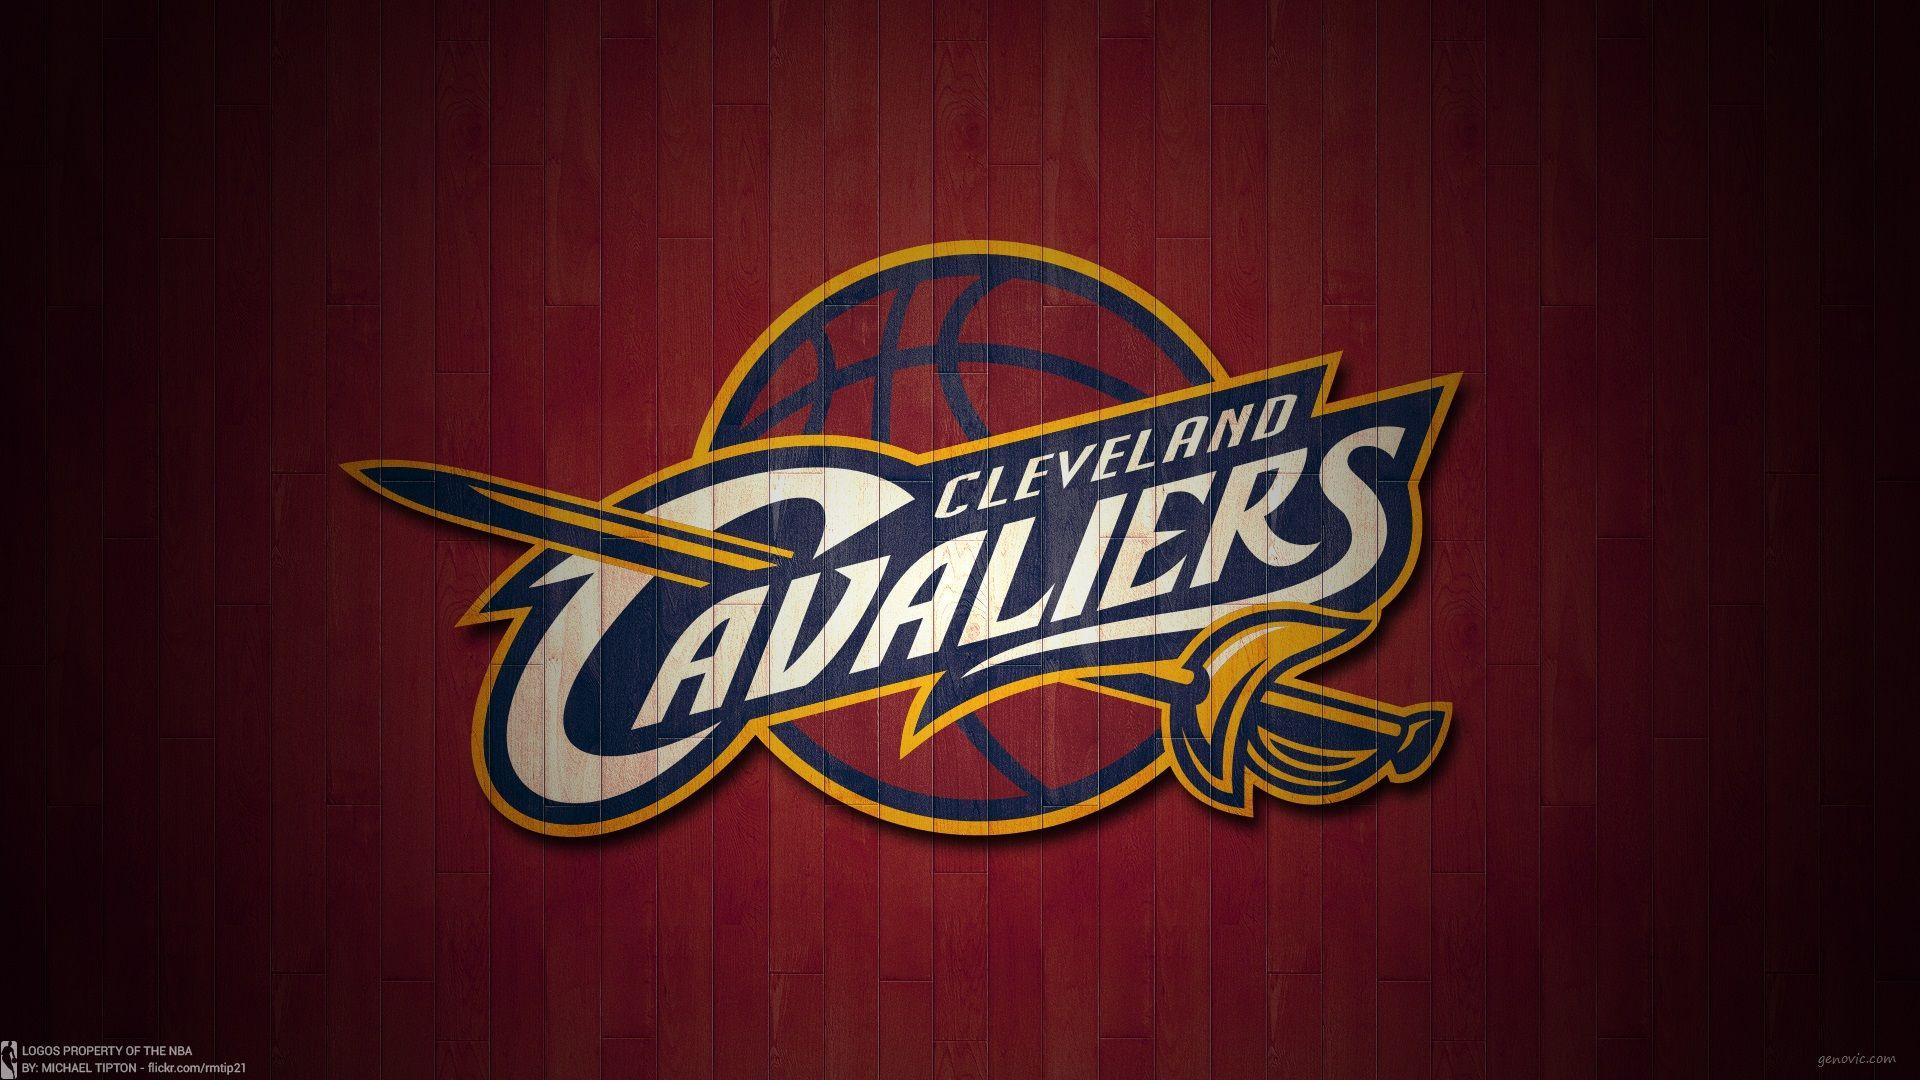 Cleveland Cavaliers HD Wallpaper. crafts. Crafts